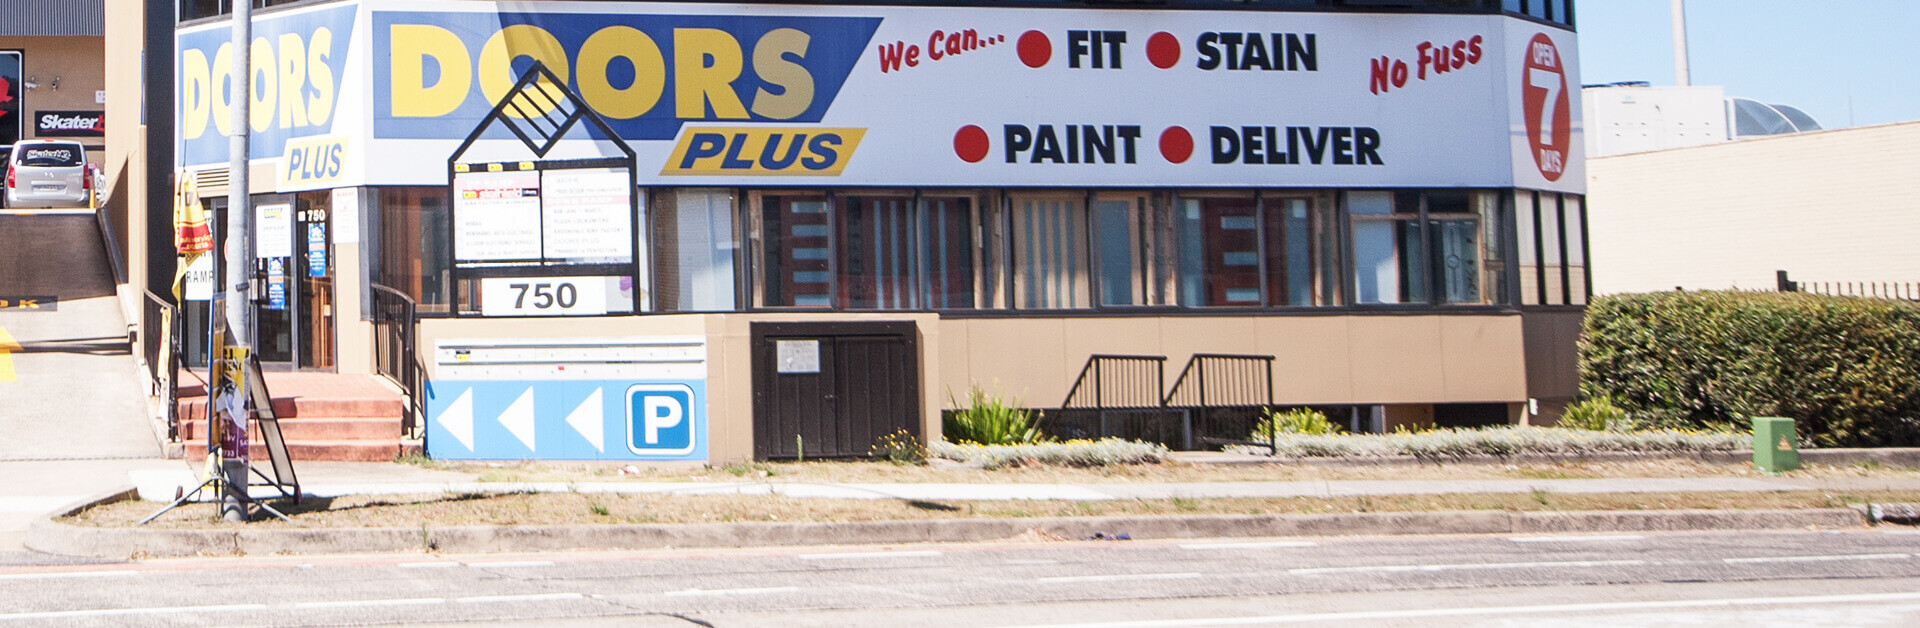 Doors Plus Brookvale Showroom in Sydney, New South Wales with car park area